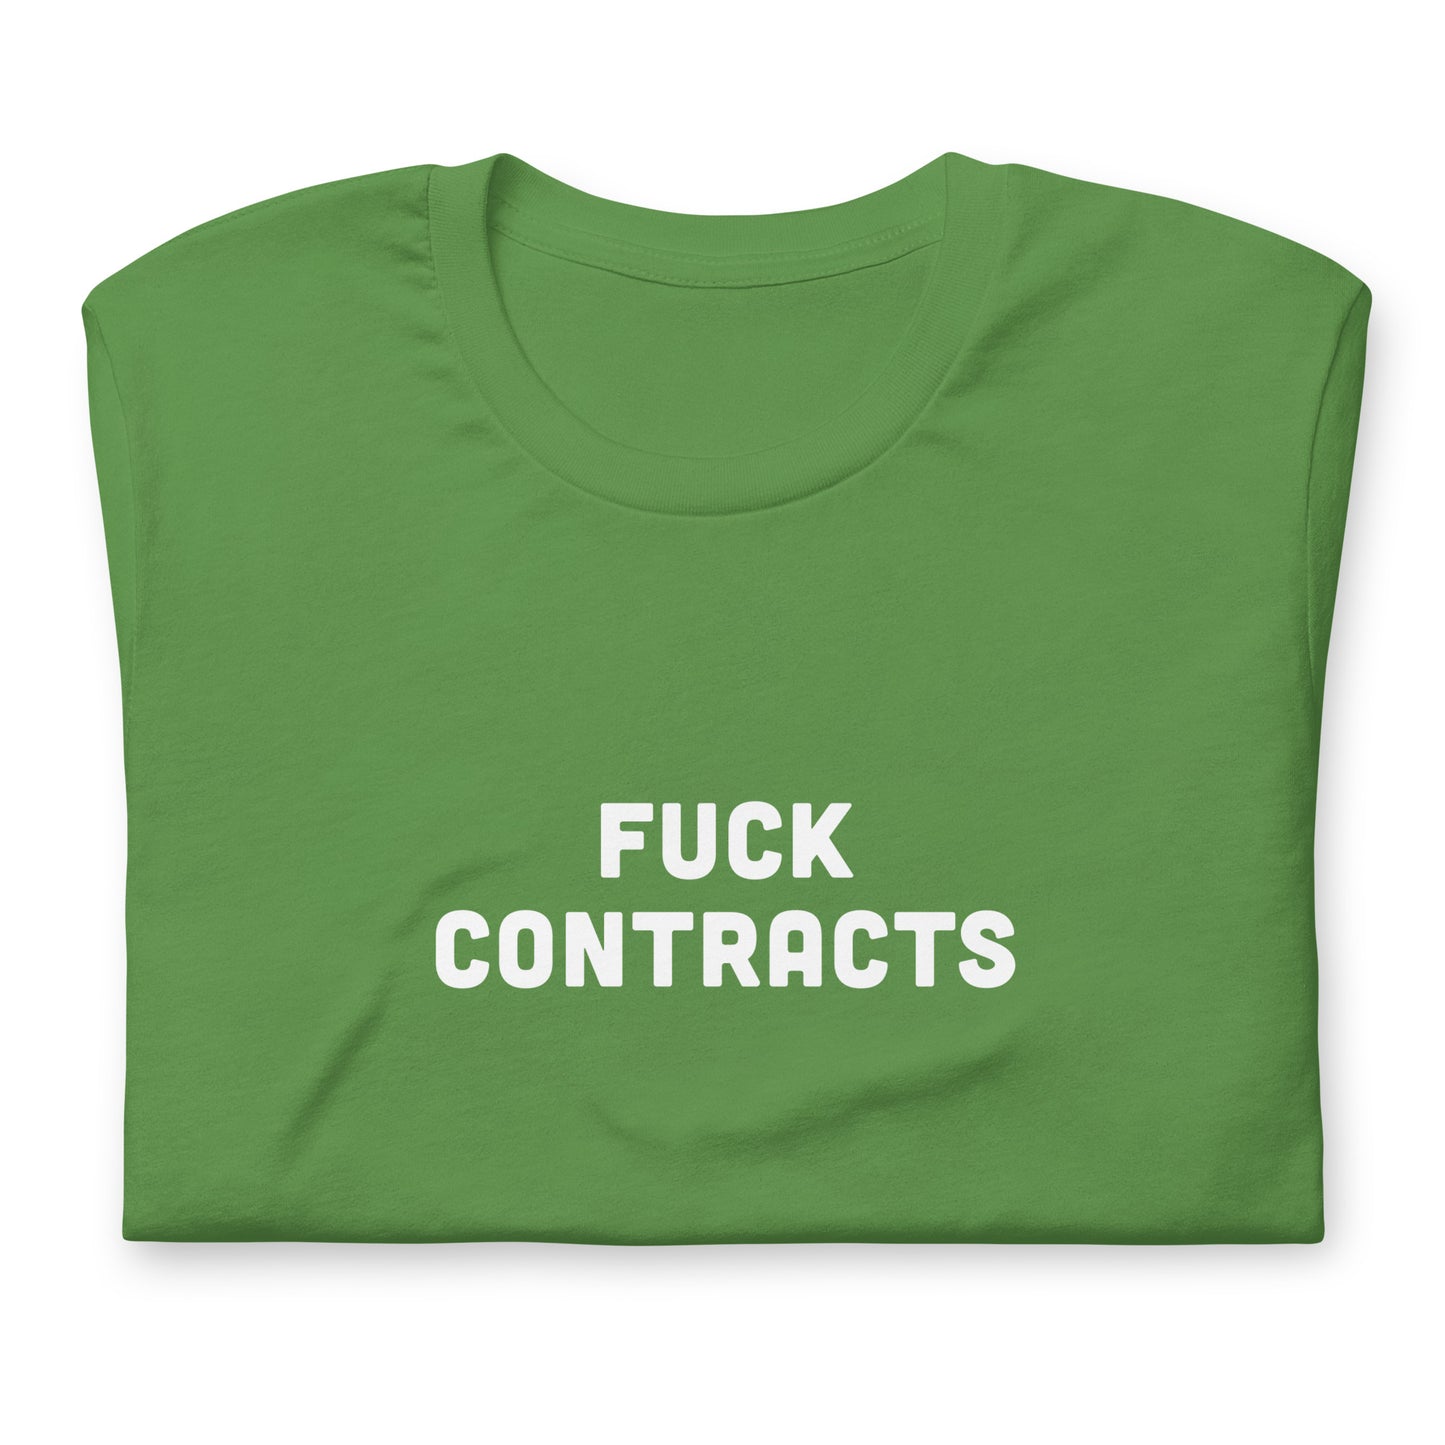 Fuck Contracts T-Shirt Size 2XL Color Navy